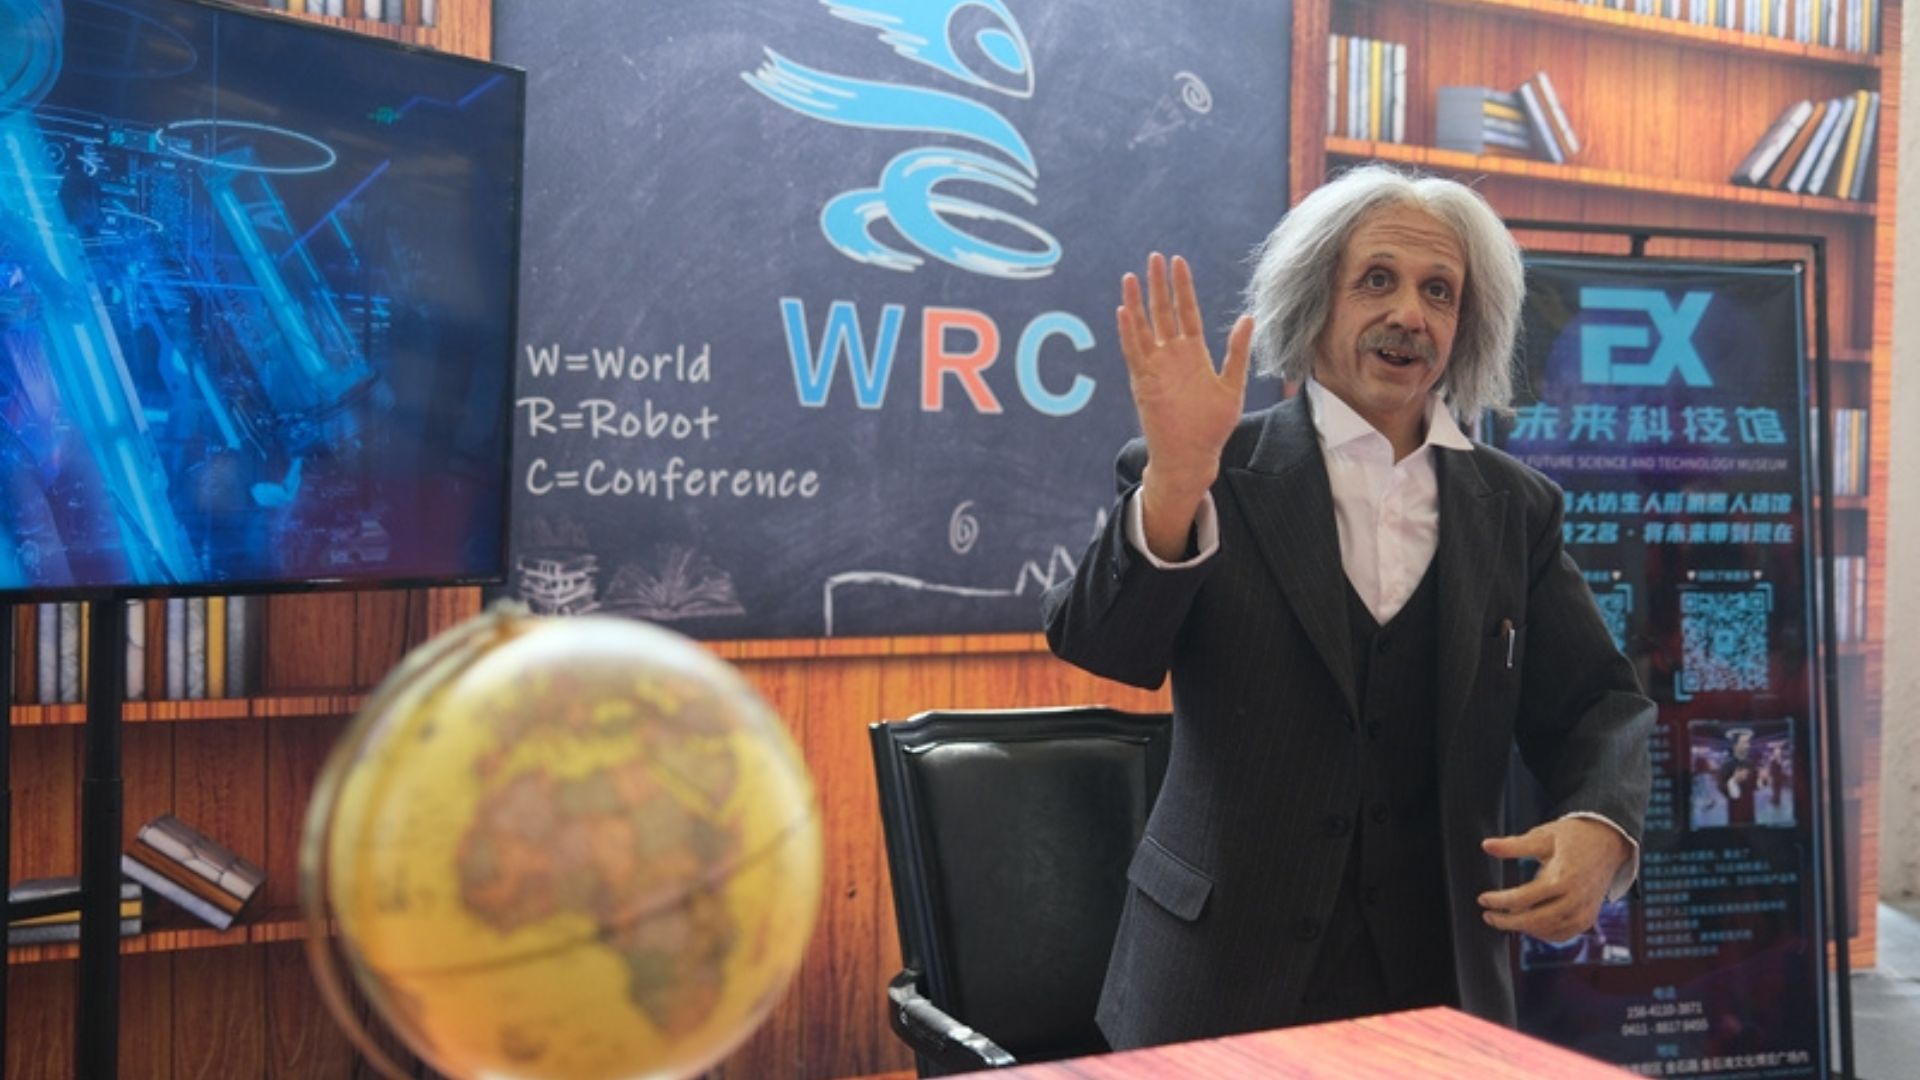 Ex Robots' Einstein humanoid is on display at the EX Future Science and Technology Museum in Liaoning province.